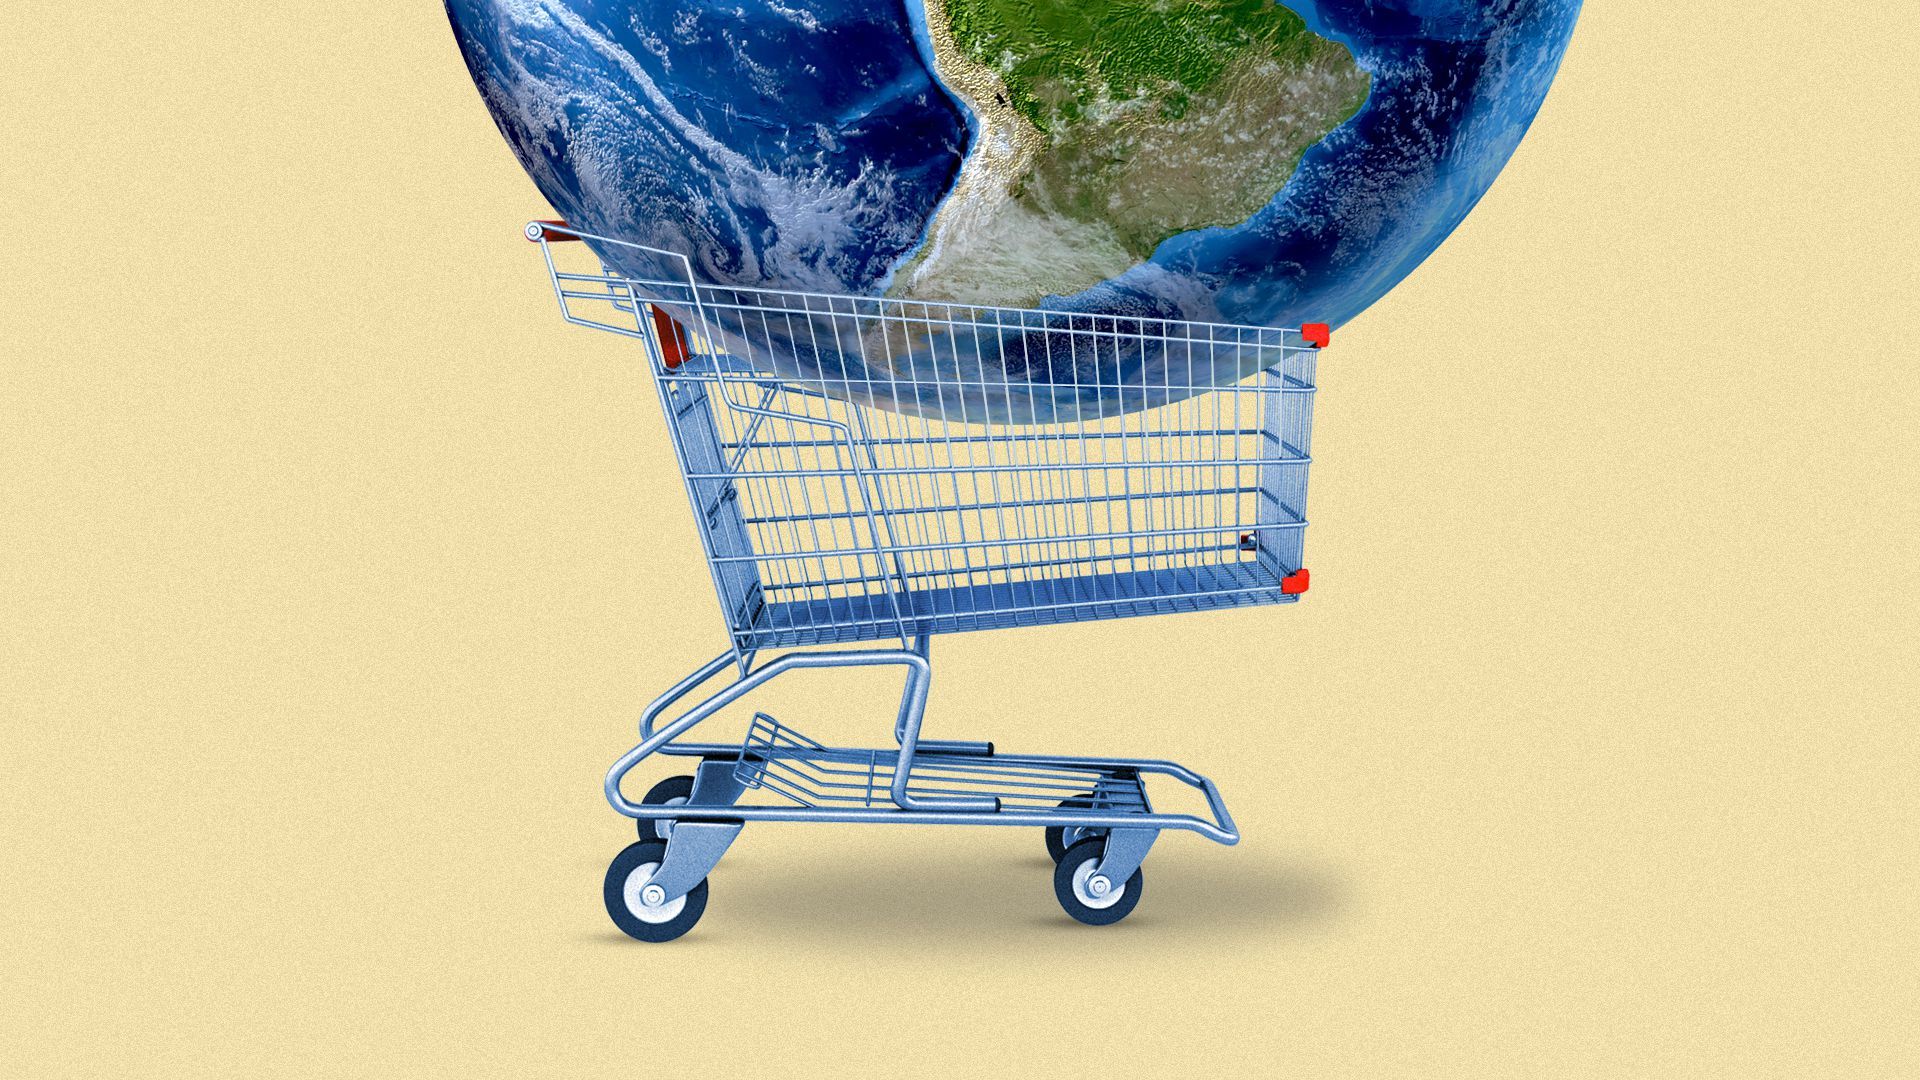 Illustration of a shopping cart with the earth inside